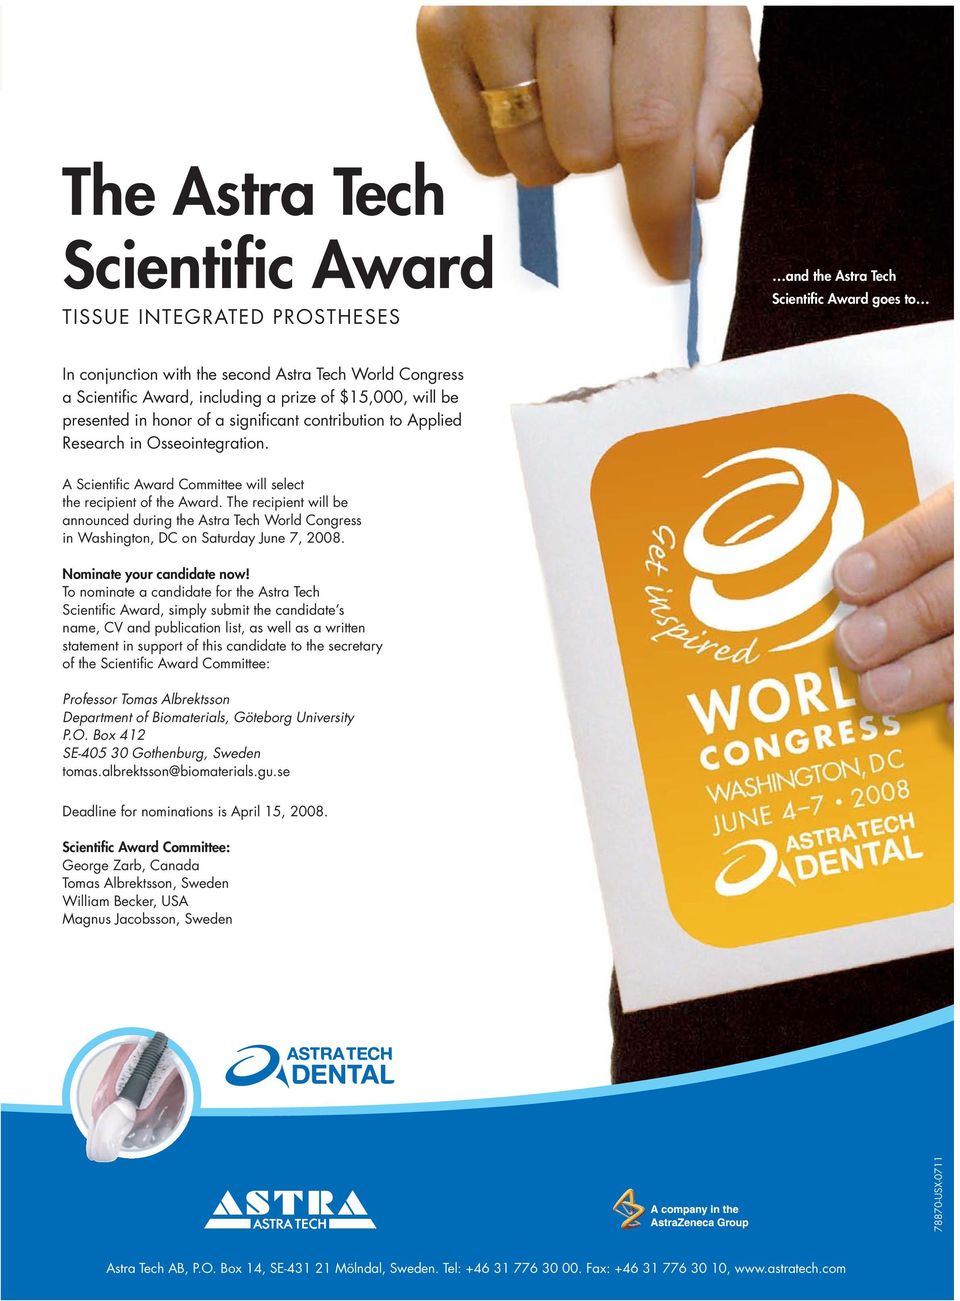 The recipient will be announced during the Astra Tech World Congress in Washington, DC on Saturday June 7, 2008. Nominate your candidate now!